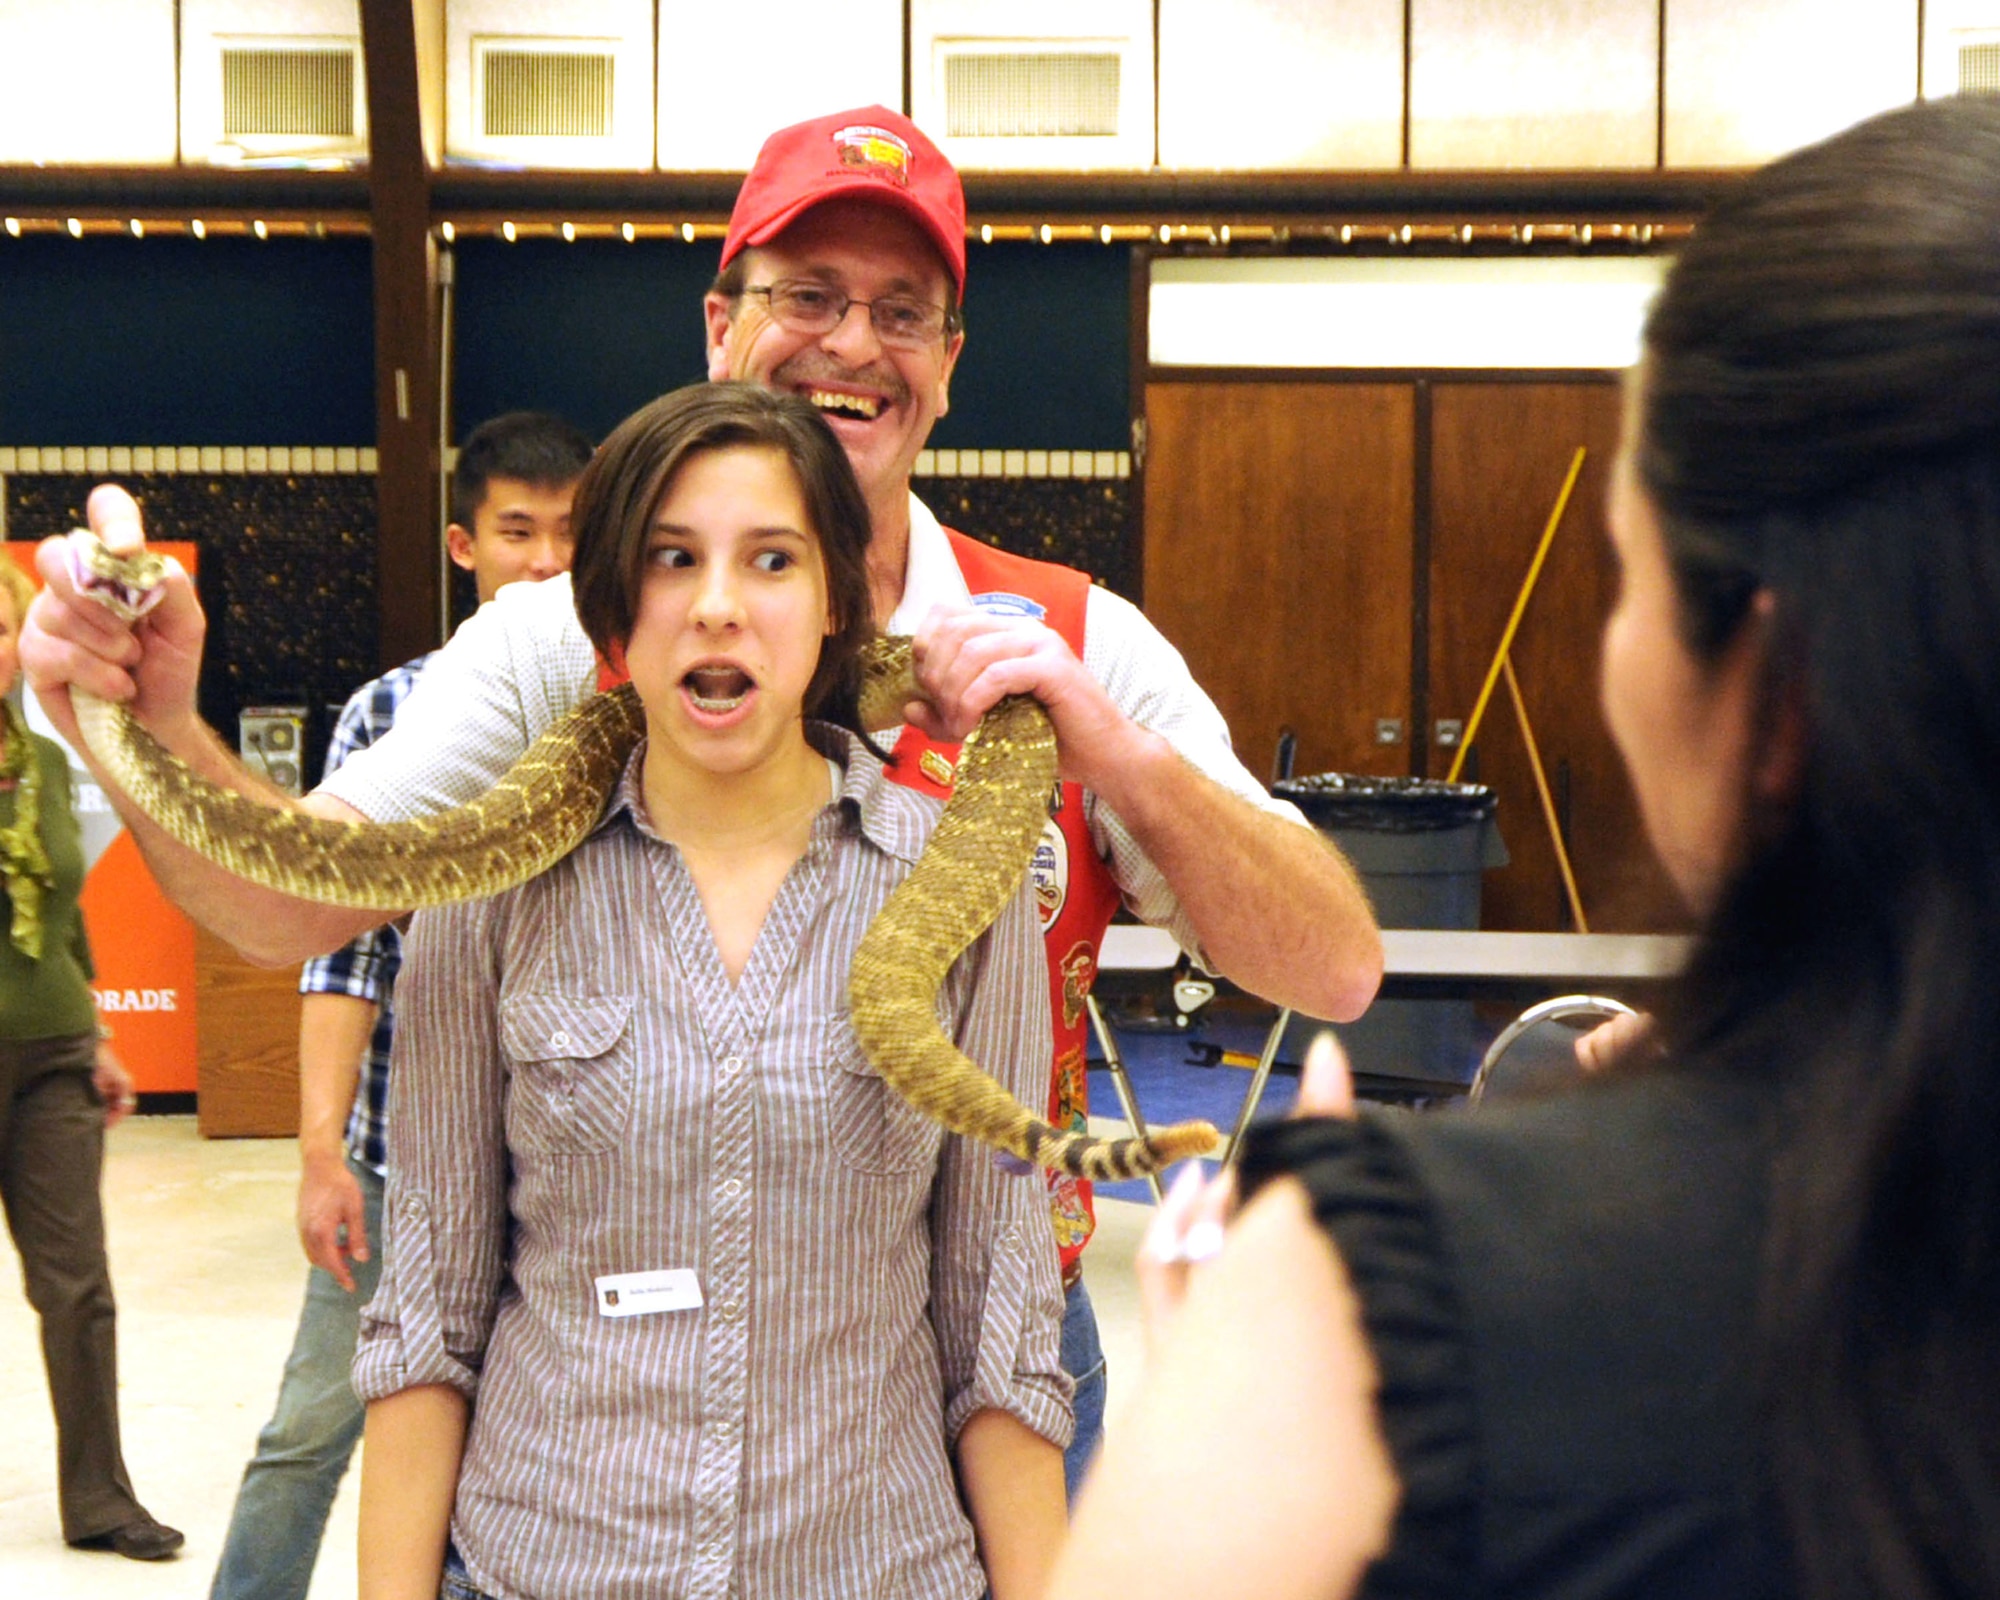 ALTUS AIR FORCE BASE, Okla. – Gabrielle Medina stands still as Fangmaster Keith Kendall drapes a rattlesnake around her neck at the Committee of 100 dinner March 12, 2012, while her mother, Major Olga Acosta, 97th  Comptroller Squadron commander, prepares to take her picture. The Committee of 100 is an Altus organization that has been hosting events for Airmen new to Altus, those returning from a deployment and students assigned to Altus AFB for training since 1984. (U.S. Air Force photo by Senior Airman Myles T. Stepp / 97th Air Mobility Wing Public Affairs / Released)